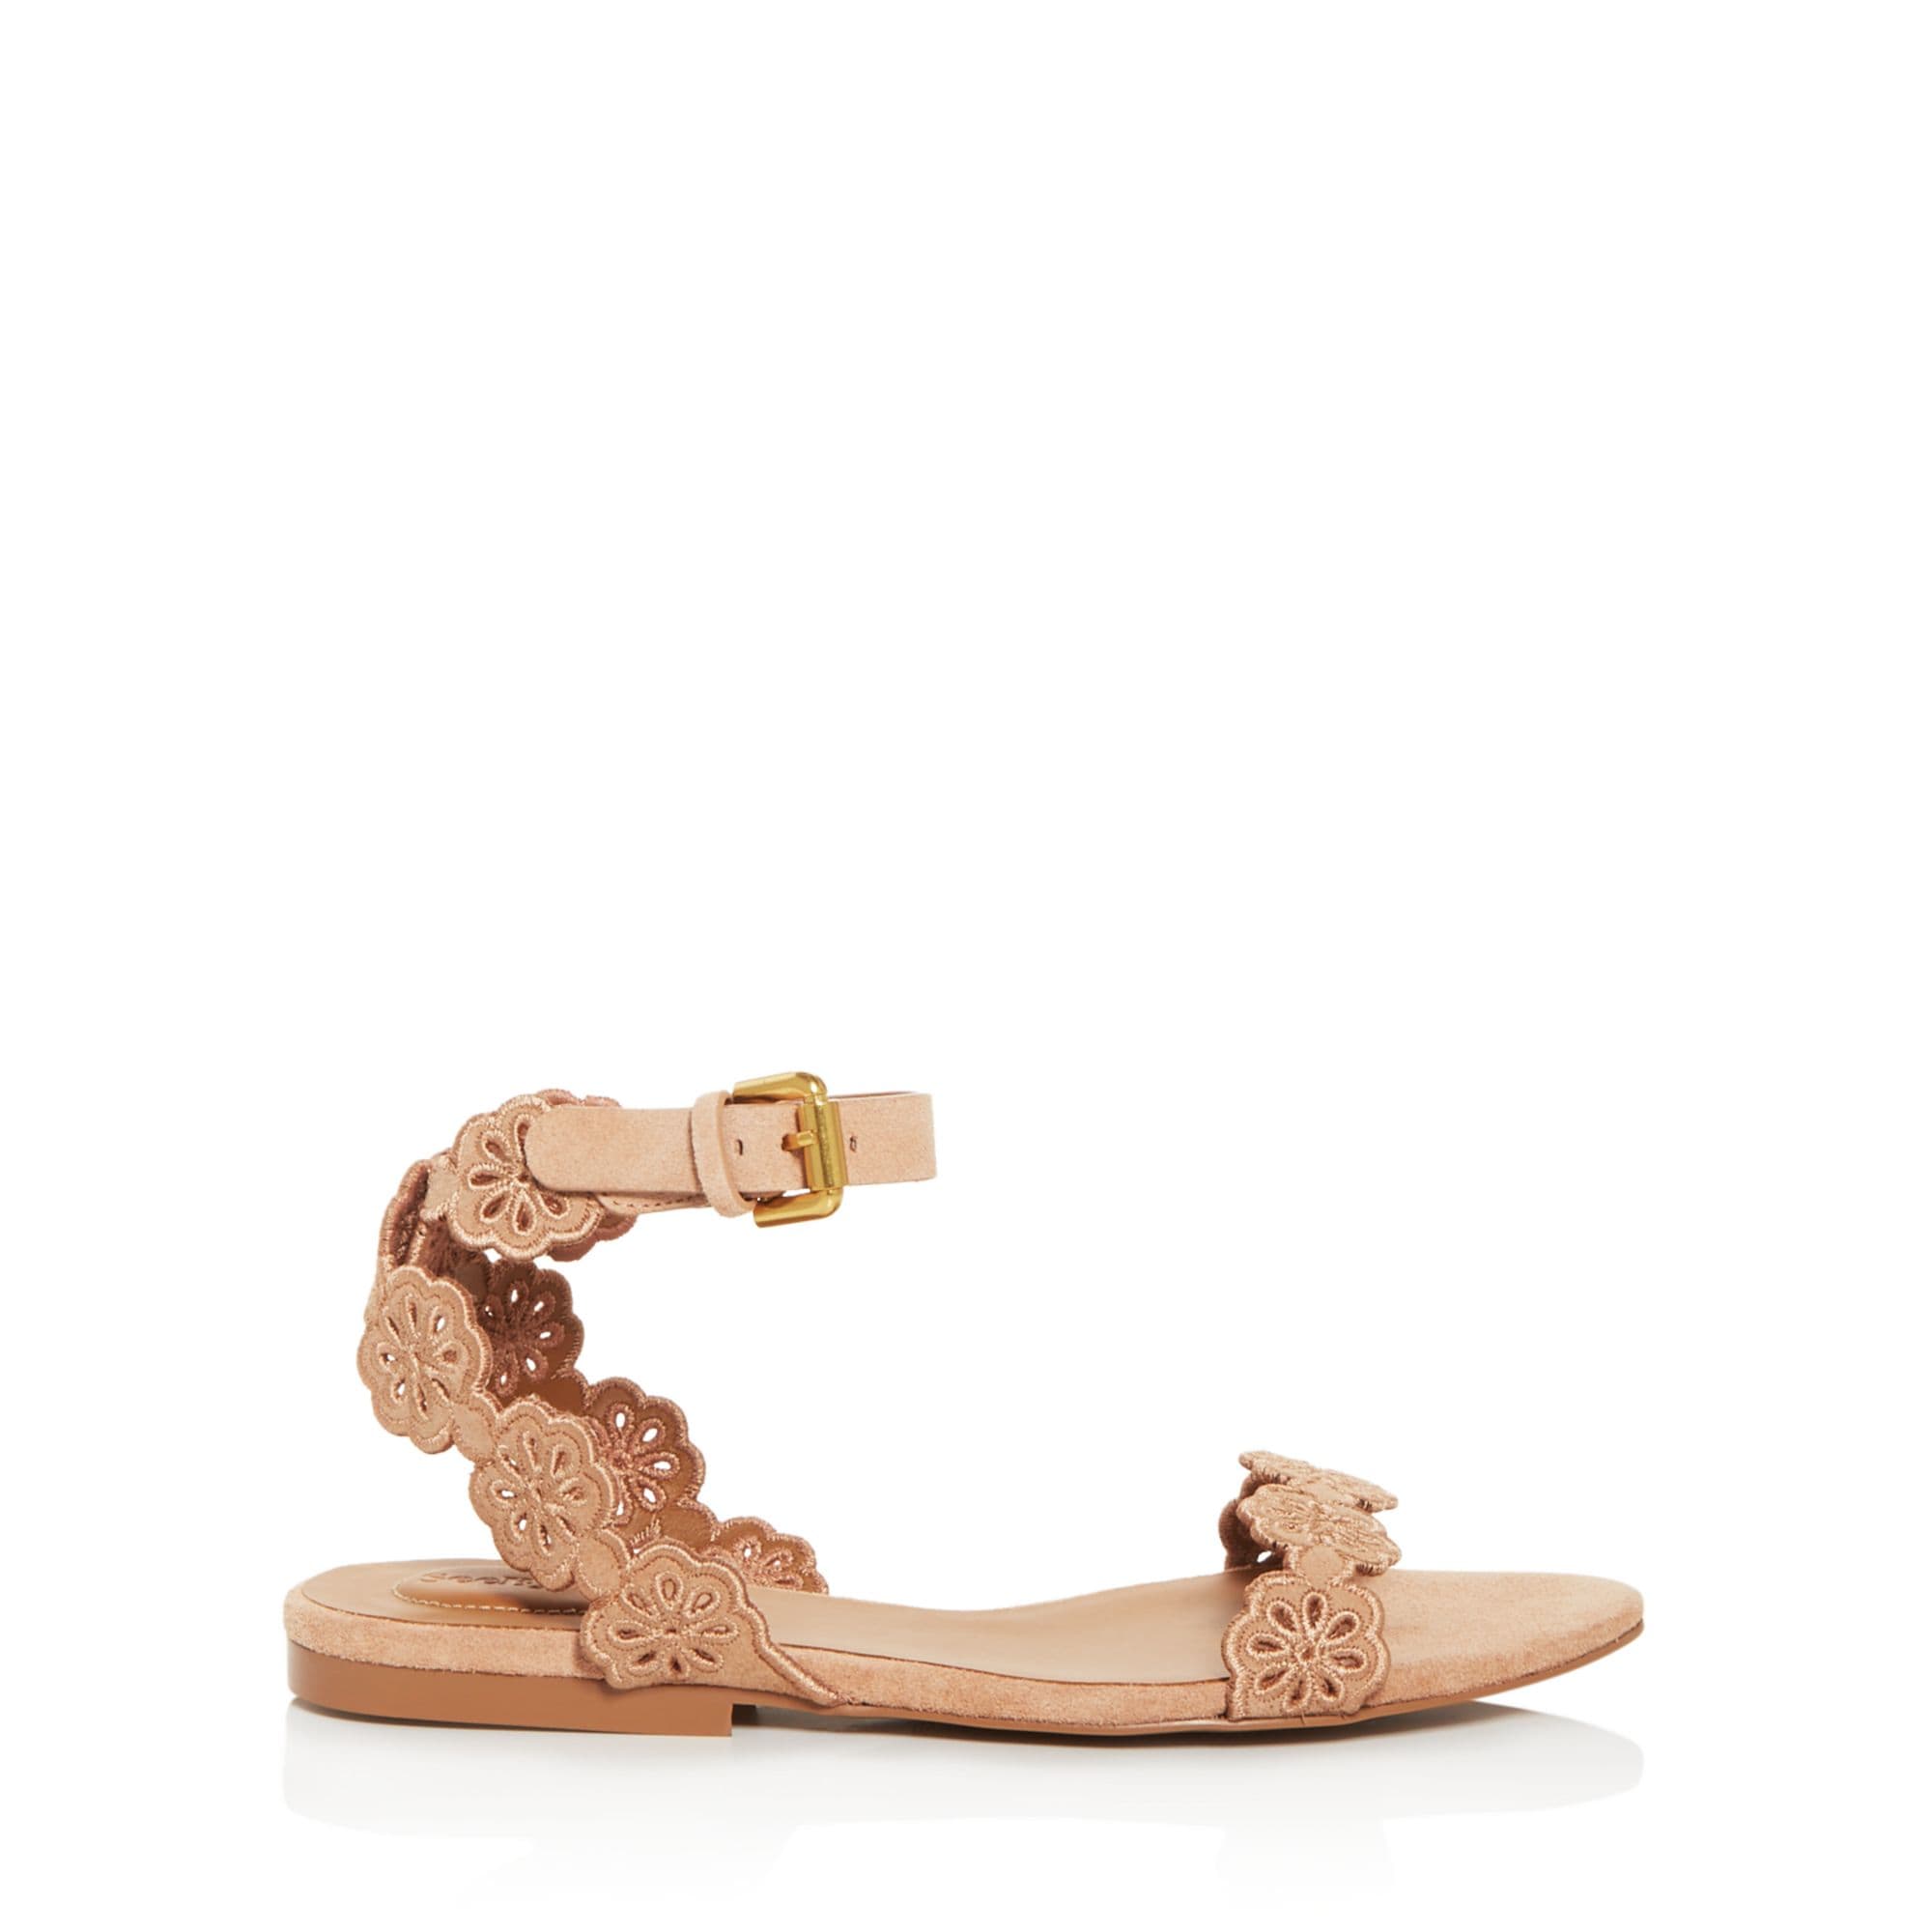 woocommerce-673321-2209615.cloudwaysapps.com-see-by-chloe-womens-beige-suede-kri-floral-cutout-sandals